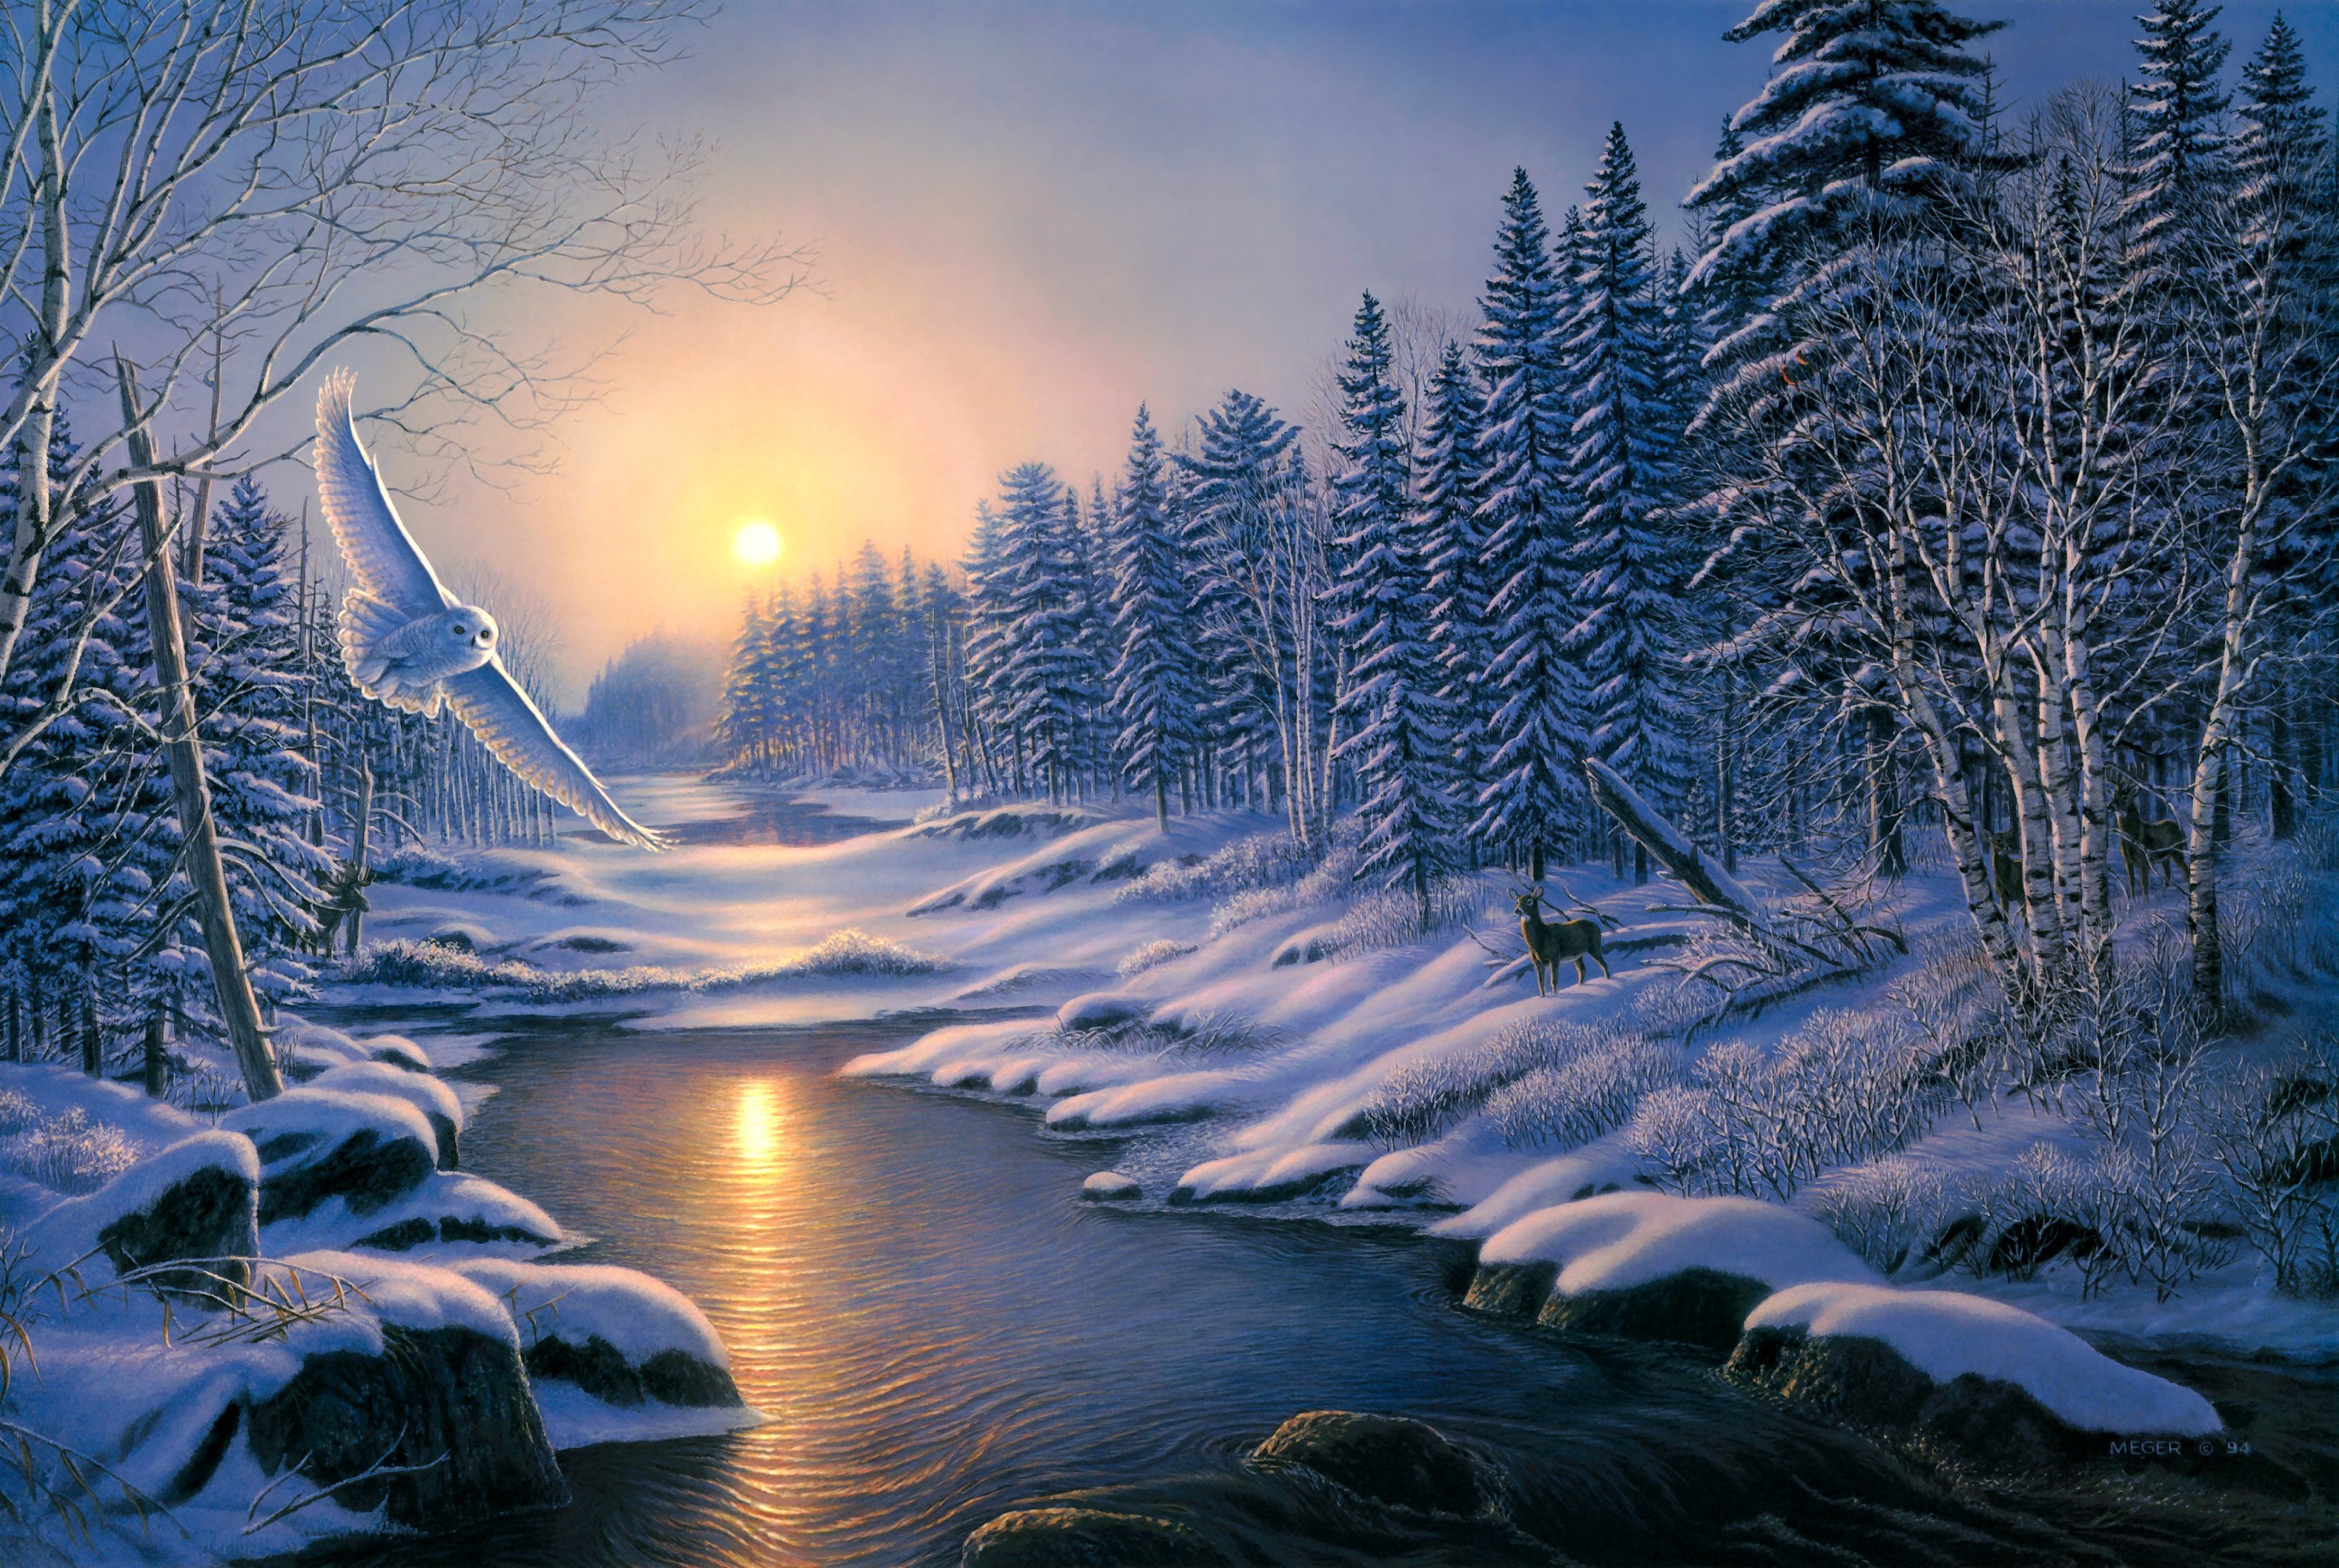 painting, Solstice, Sunset, Winter, Snow, Nature, Forest